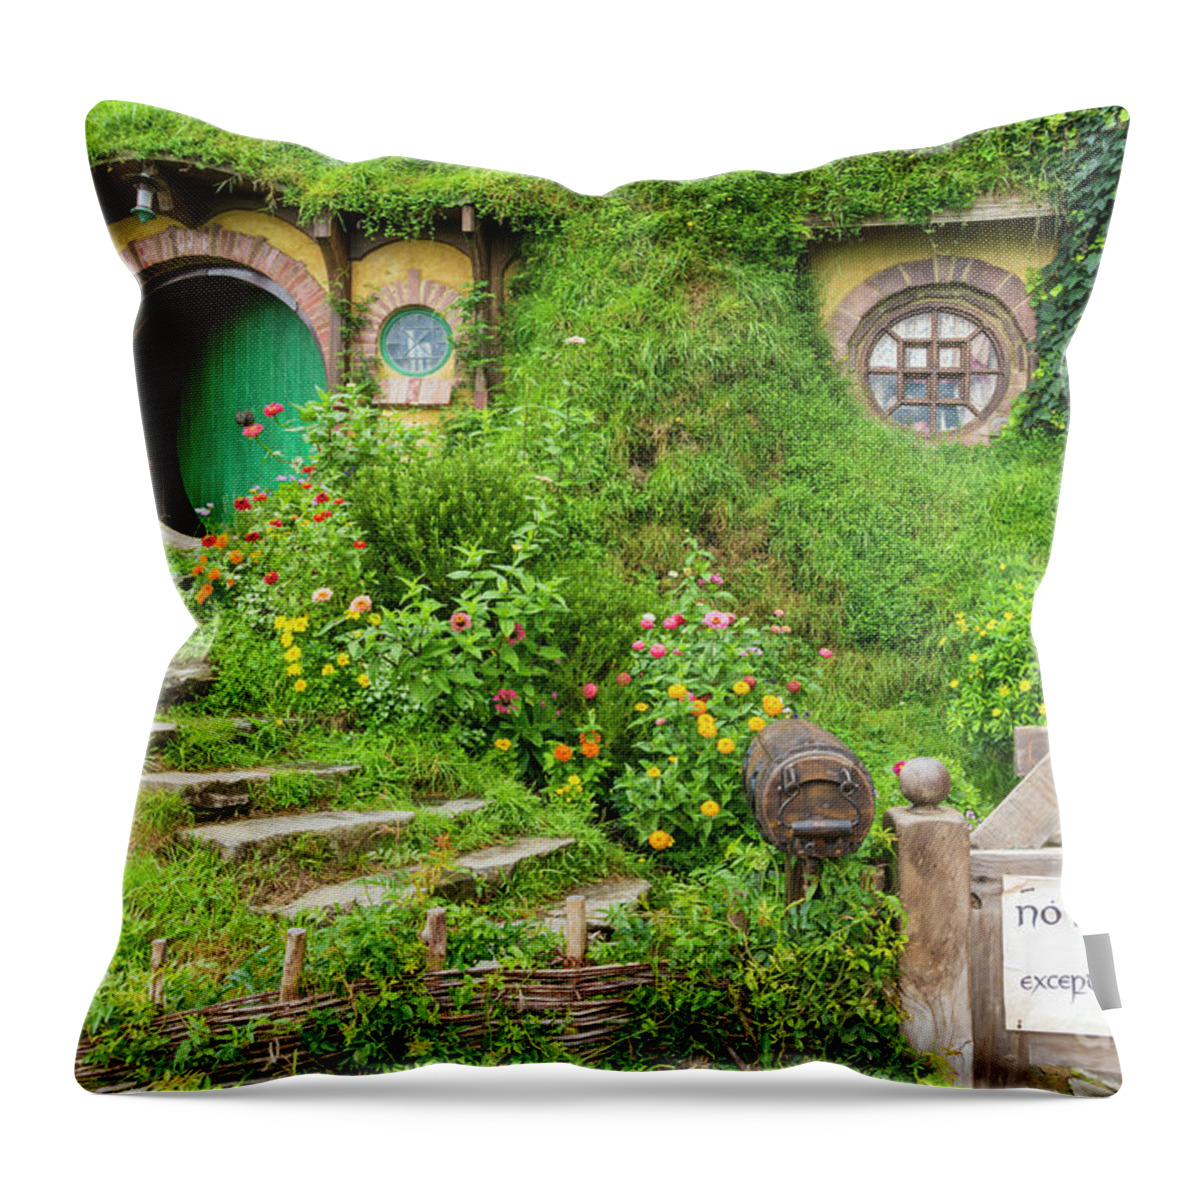 Hobbiton Throw Pillow featuring the photograph Bag End, Hobbiton, New Zealand by Neale And Judith Clark